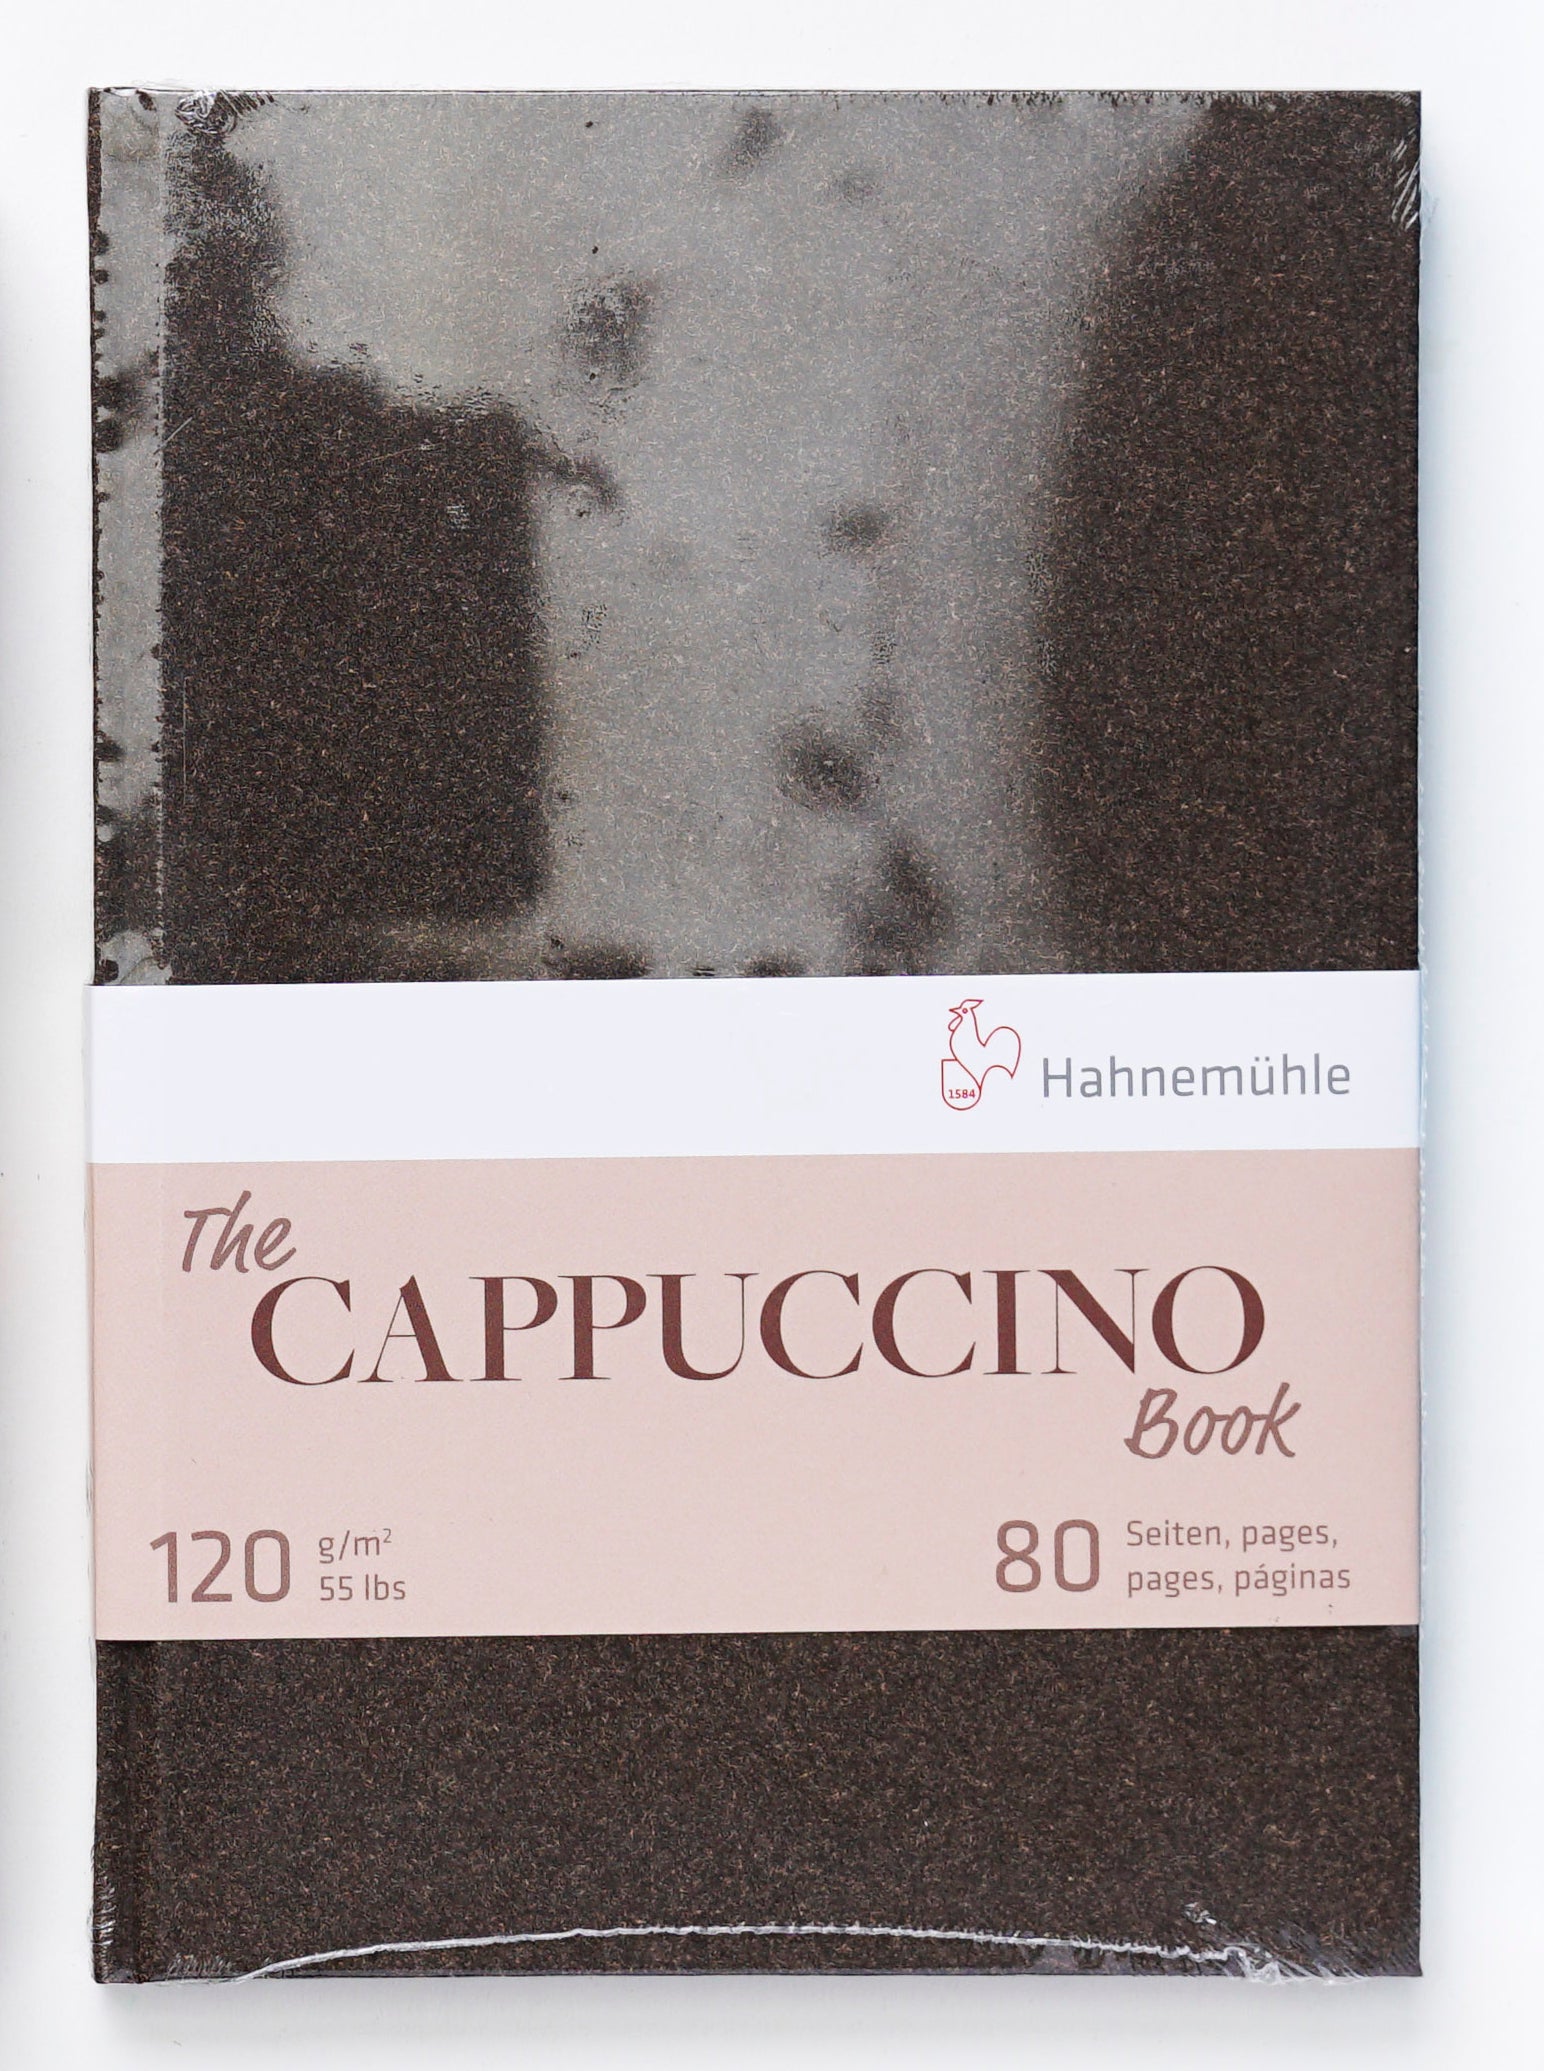 Hahnemuhle A5 Cappuccino Book 120g 